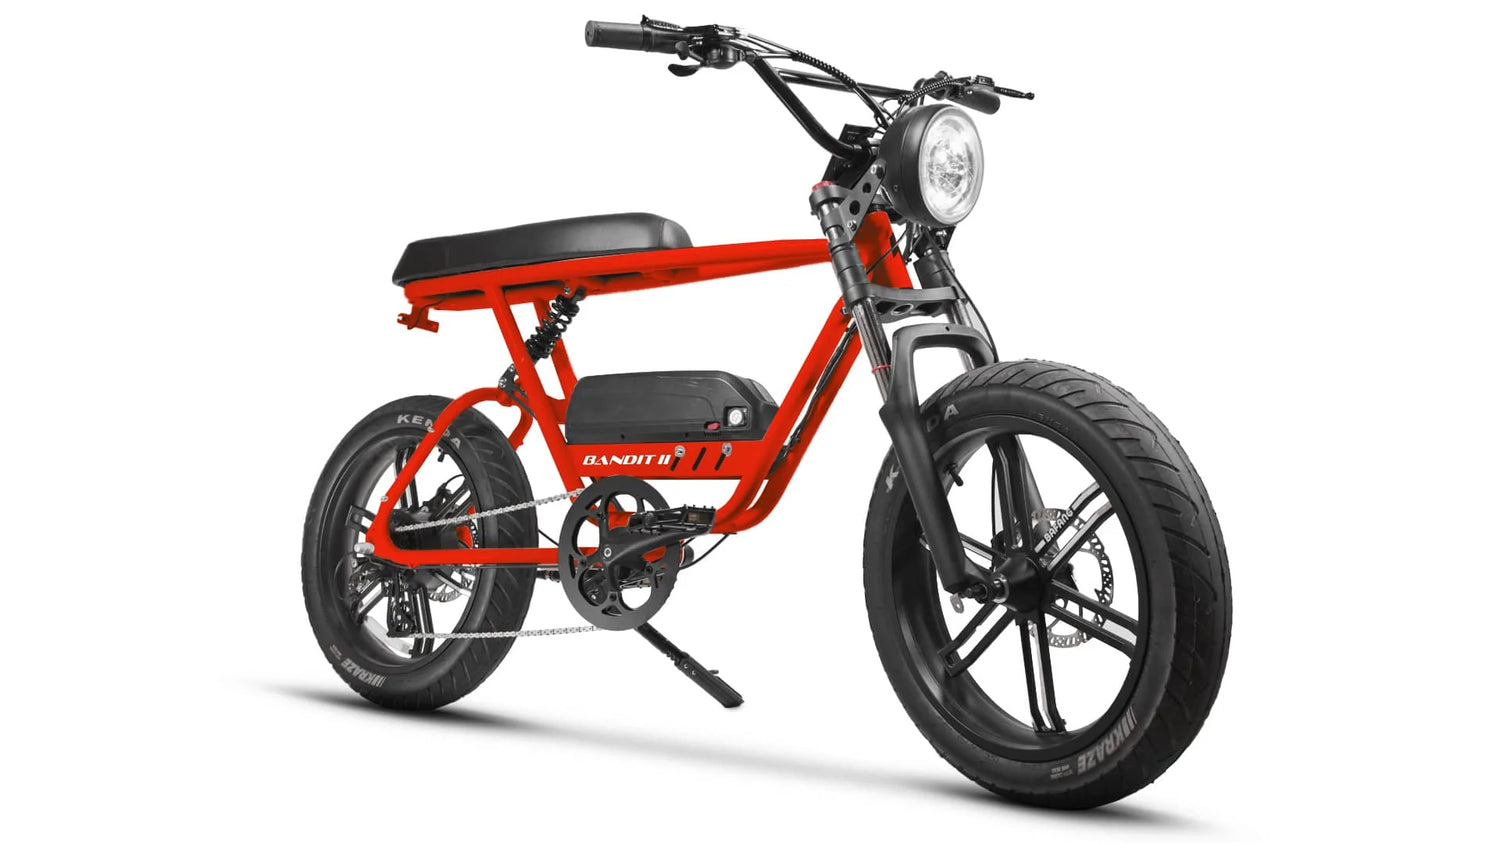 AN ELECTRIC BIKE YOU'LL BE ADDICTED TO